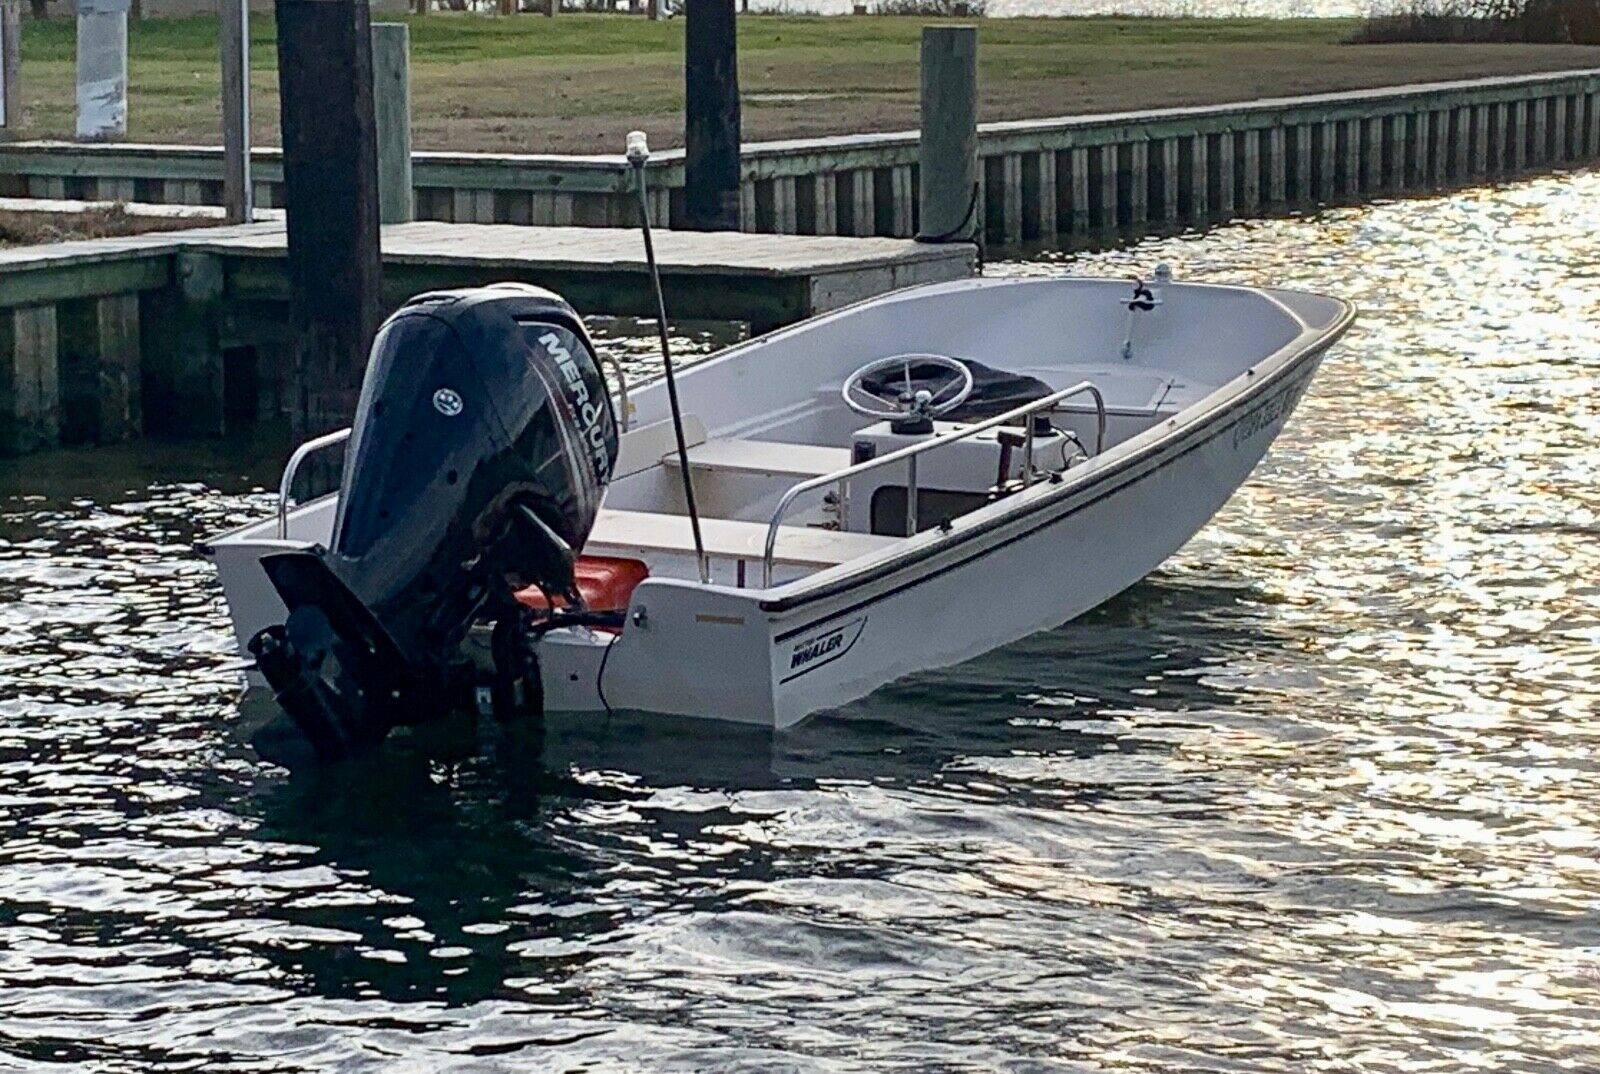 Boston Whaler 17 Standard 1996 for sale for $13,000 - Boats-from-USA.com